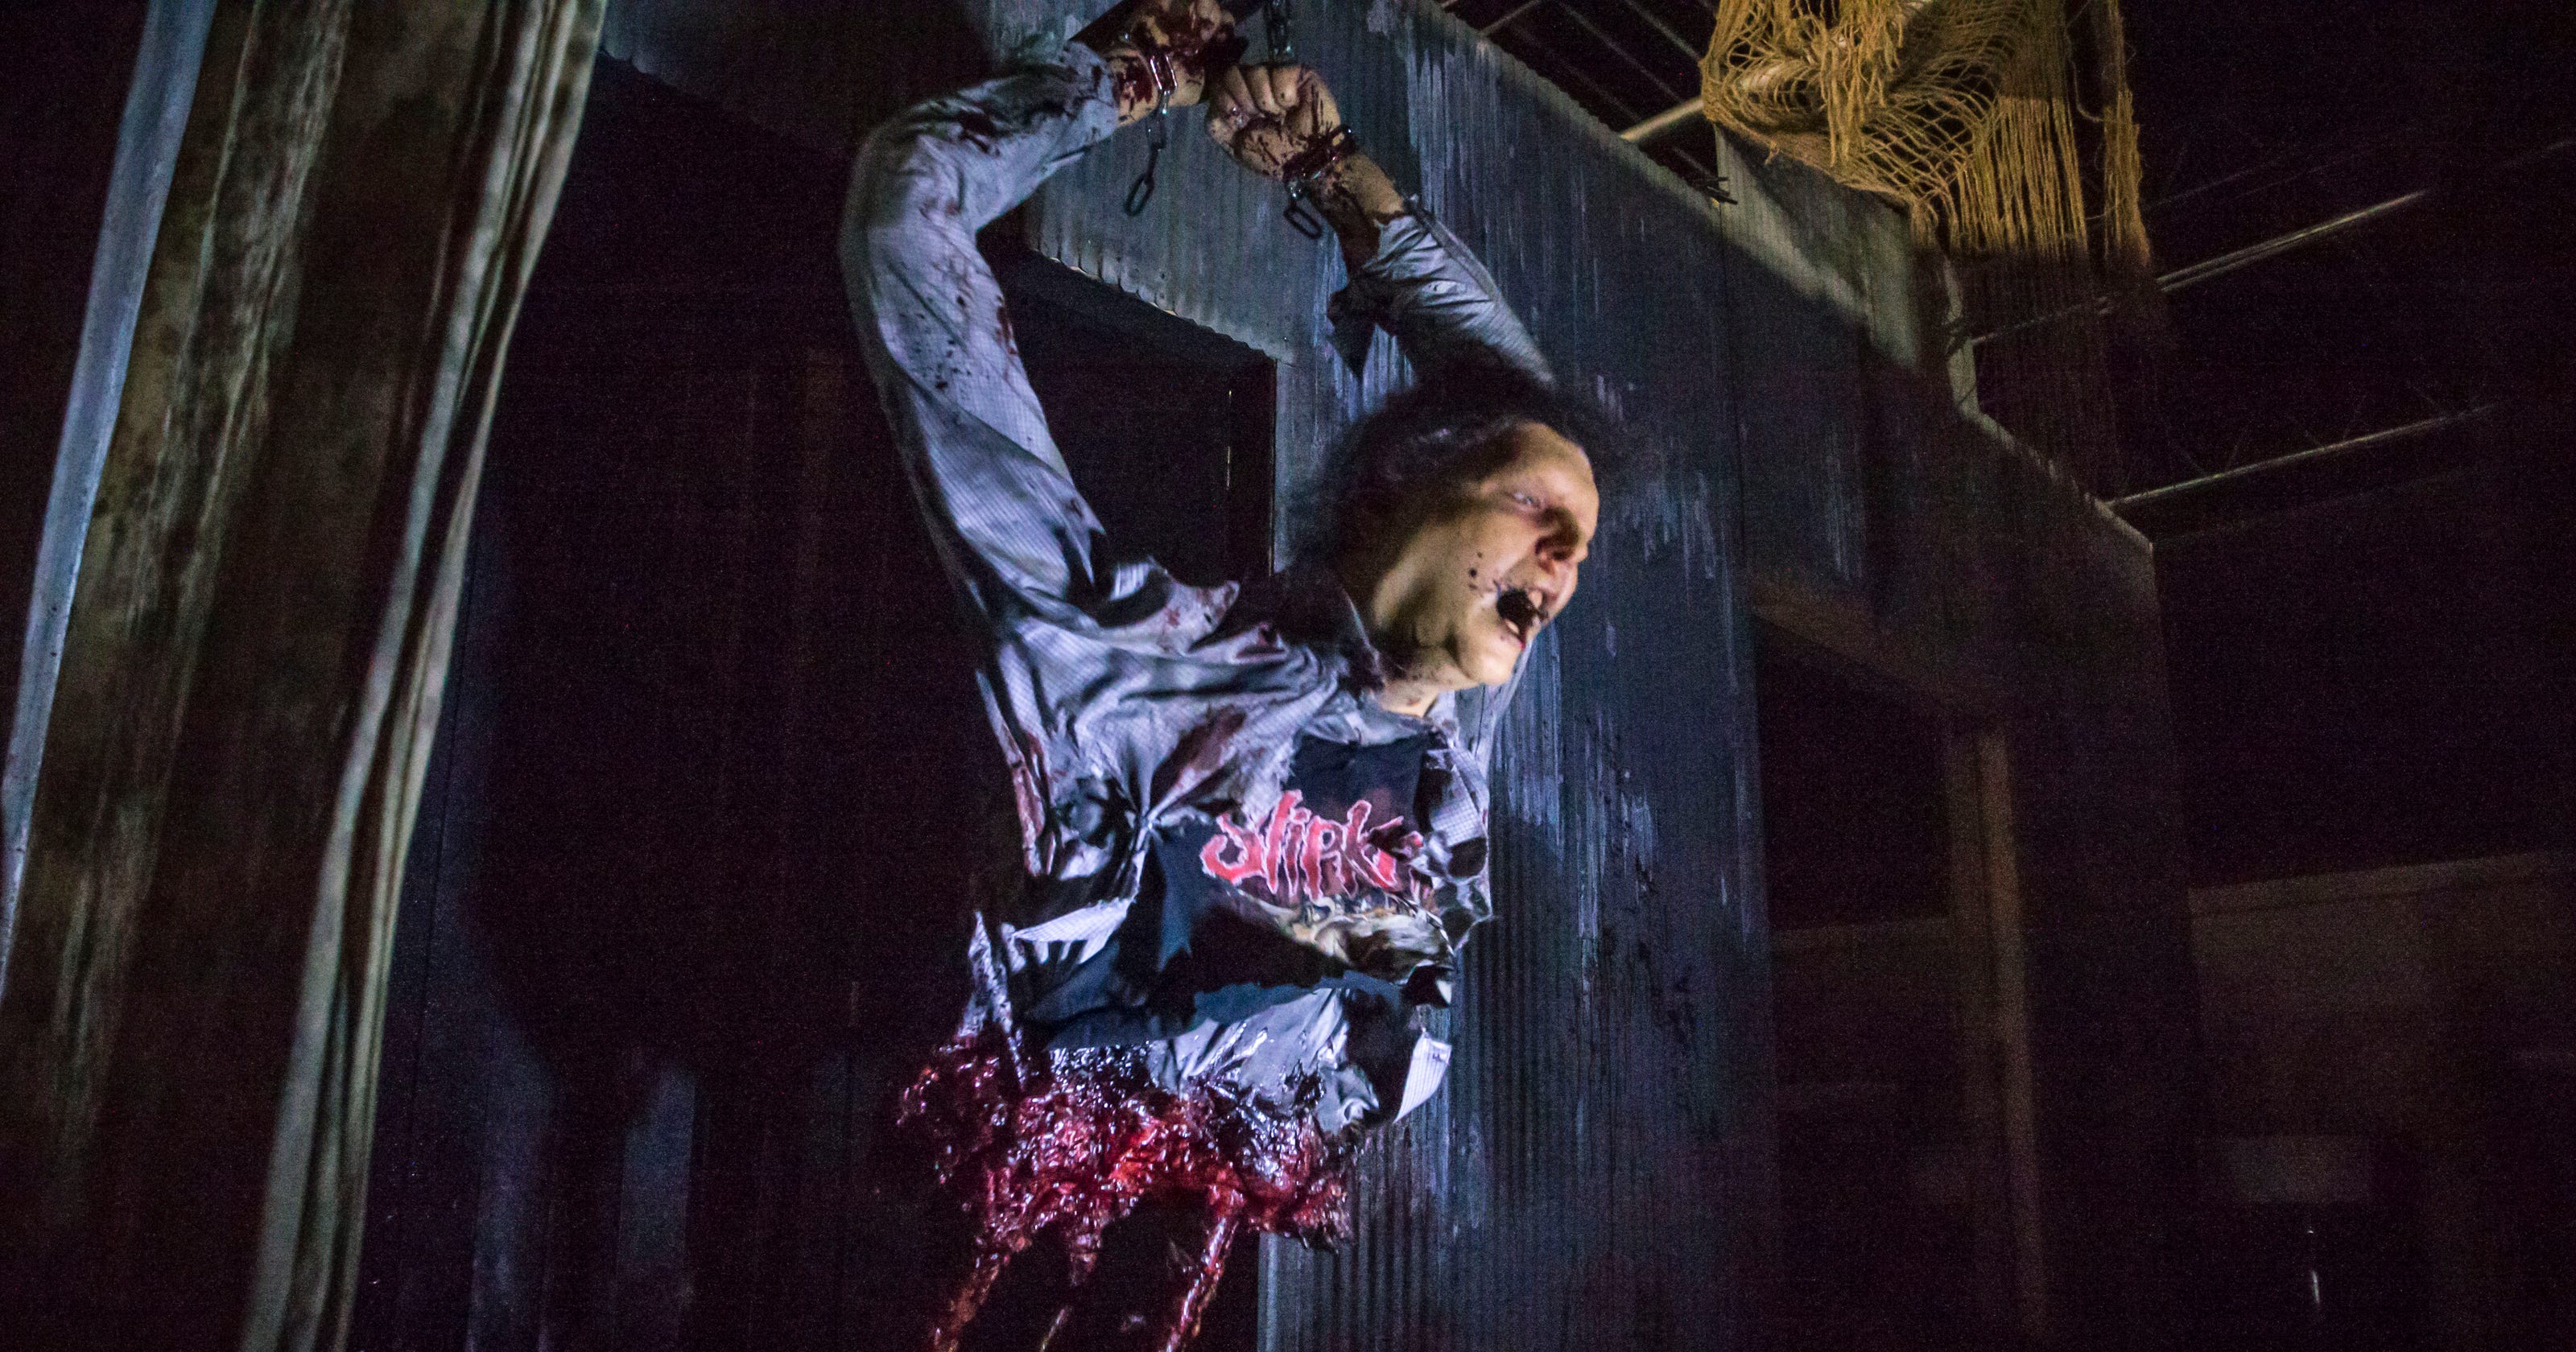 Slaughterhouse: A look inside the Slipknot haunted house in Des Moines